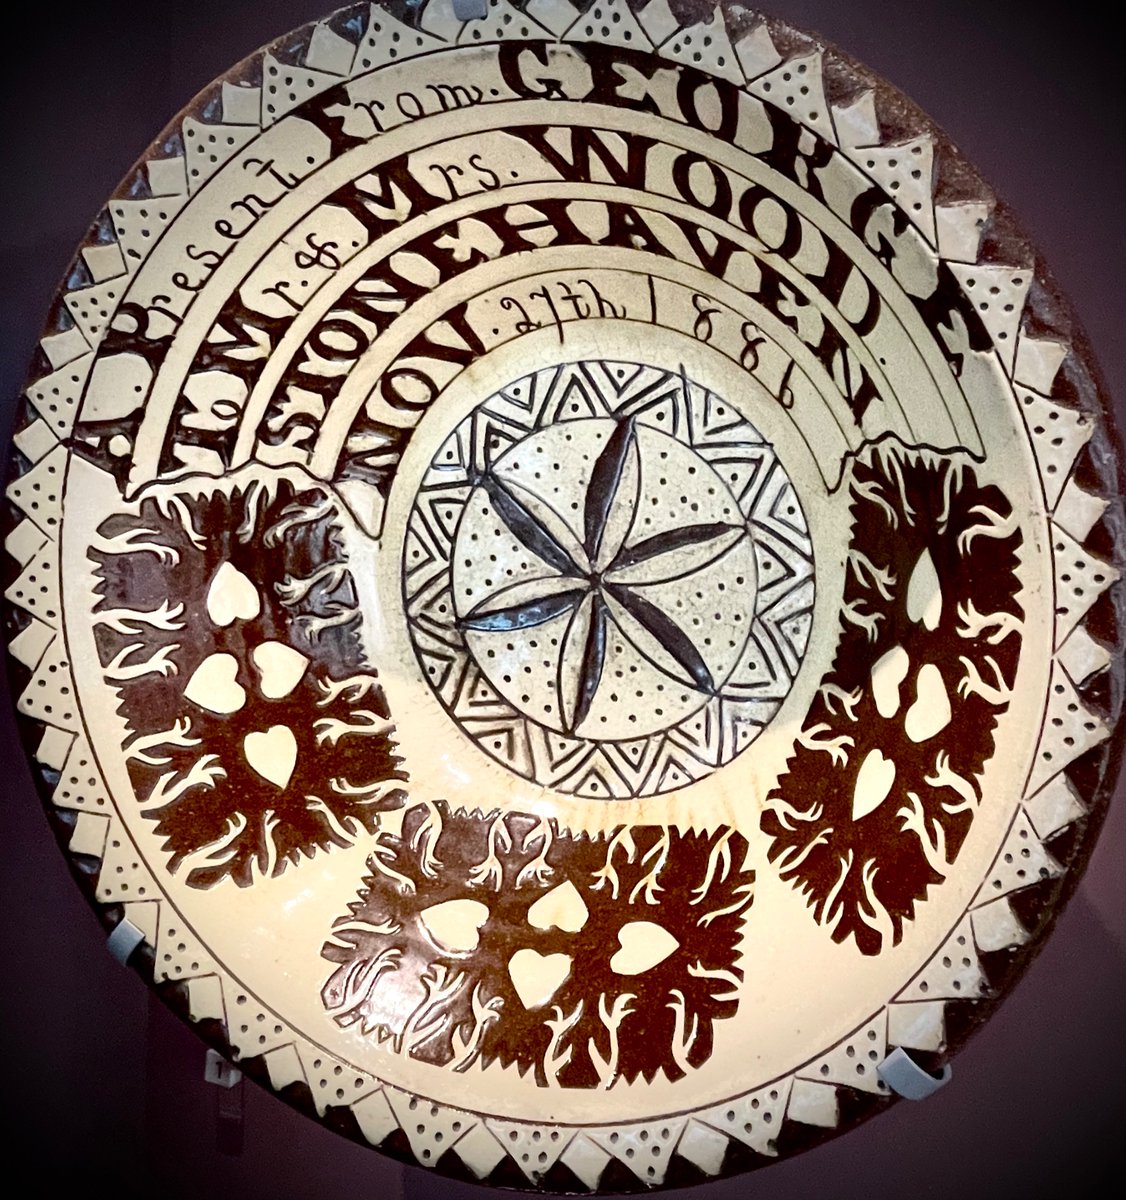 A dairy bowl gifted to Mr and Mrs Wood of Stonehaven in 1886, in hope that neither milk nor marriage ever turned sour. Made by Seaton Pottery. Aberdeen Art Gallery.